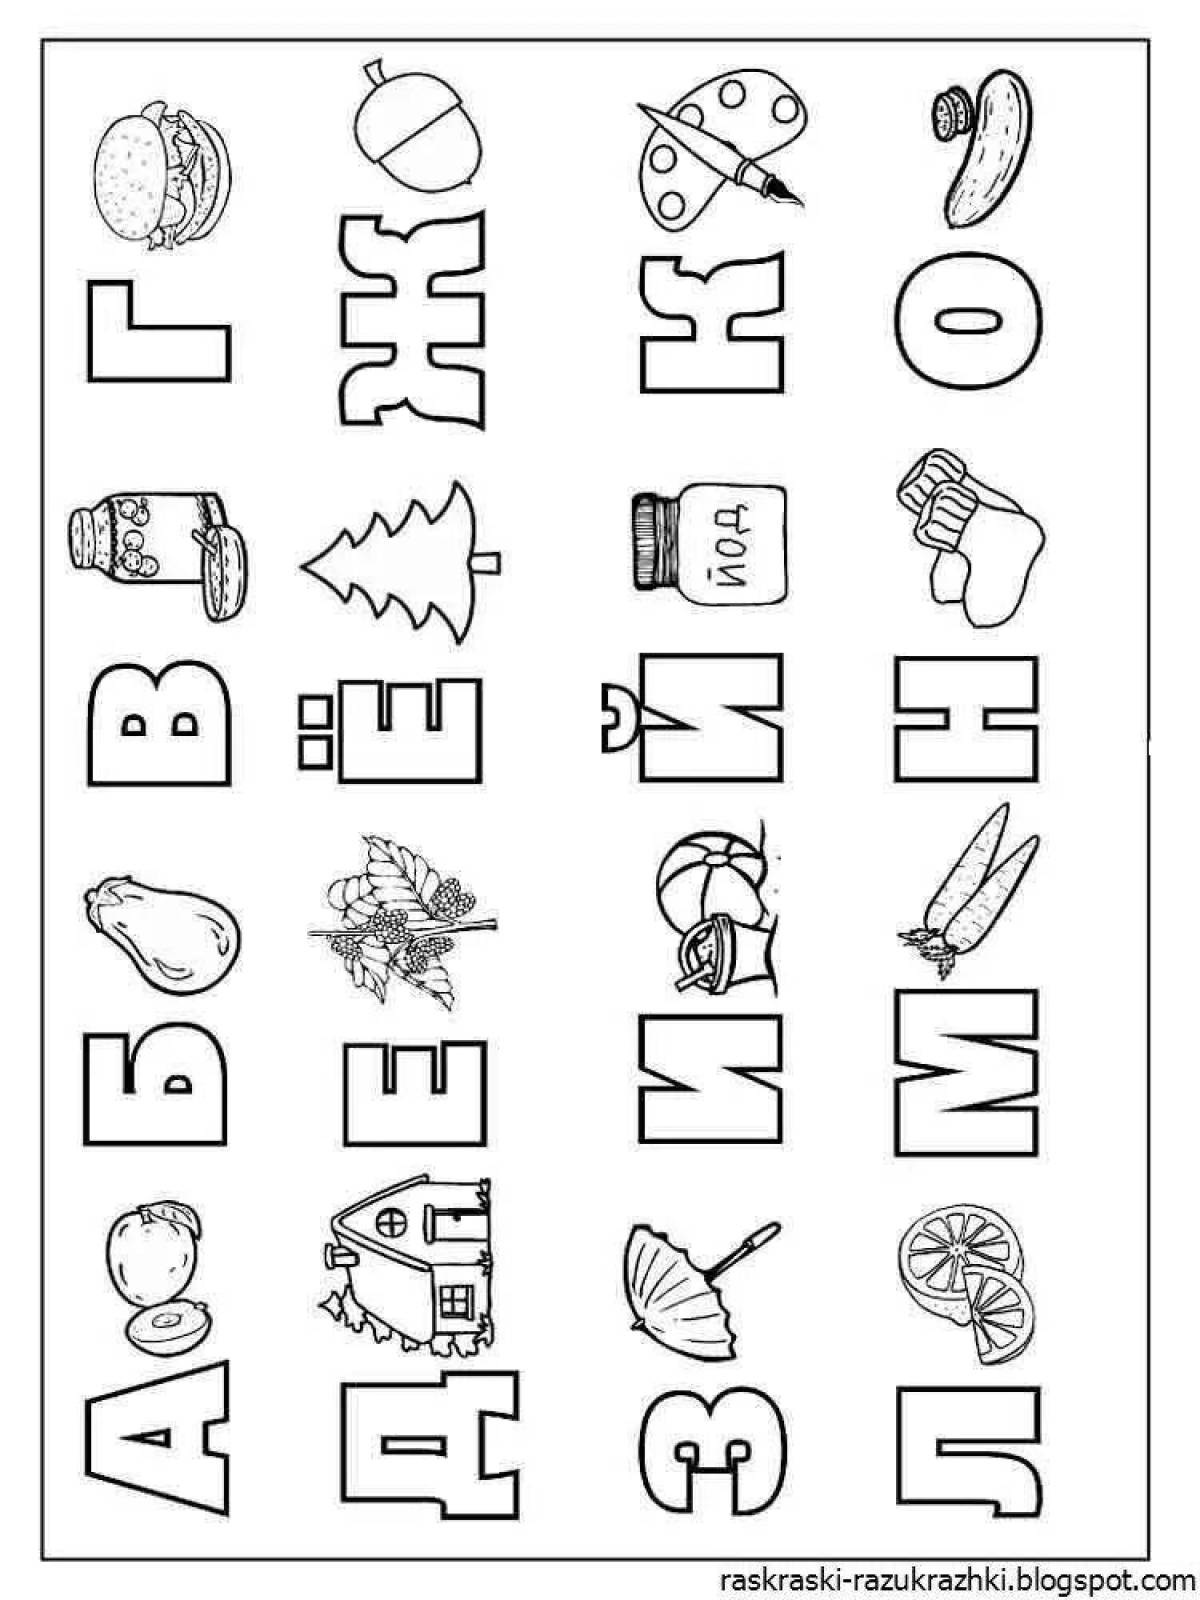 Coloring book for kids with alphabet